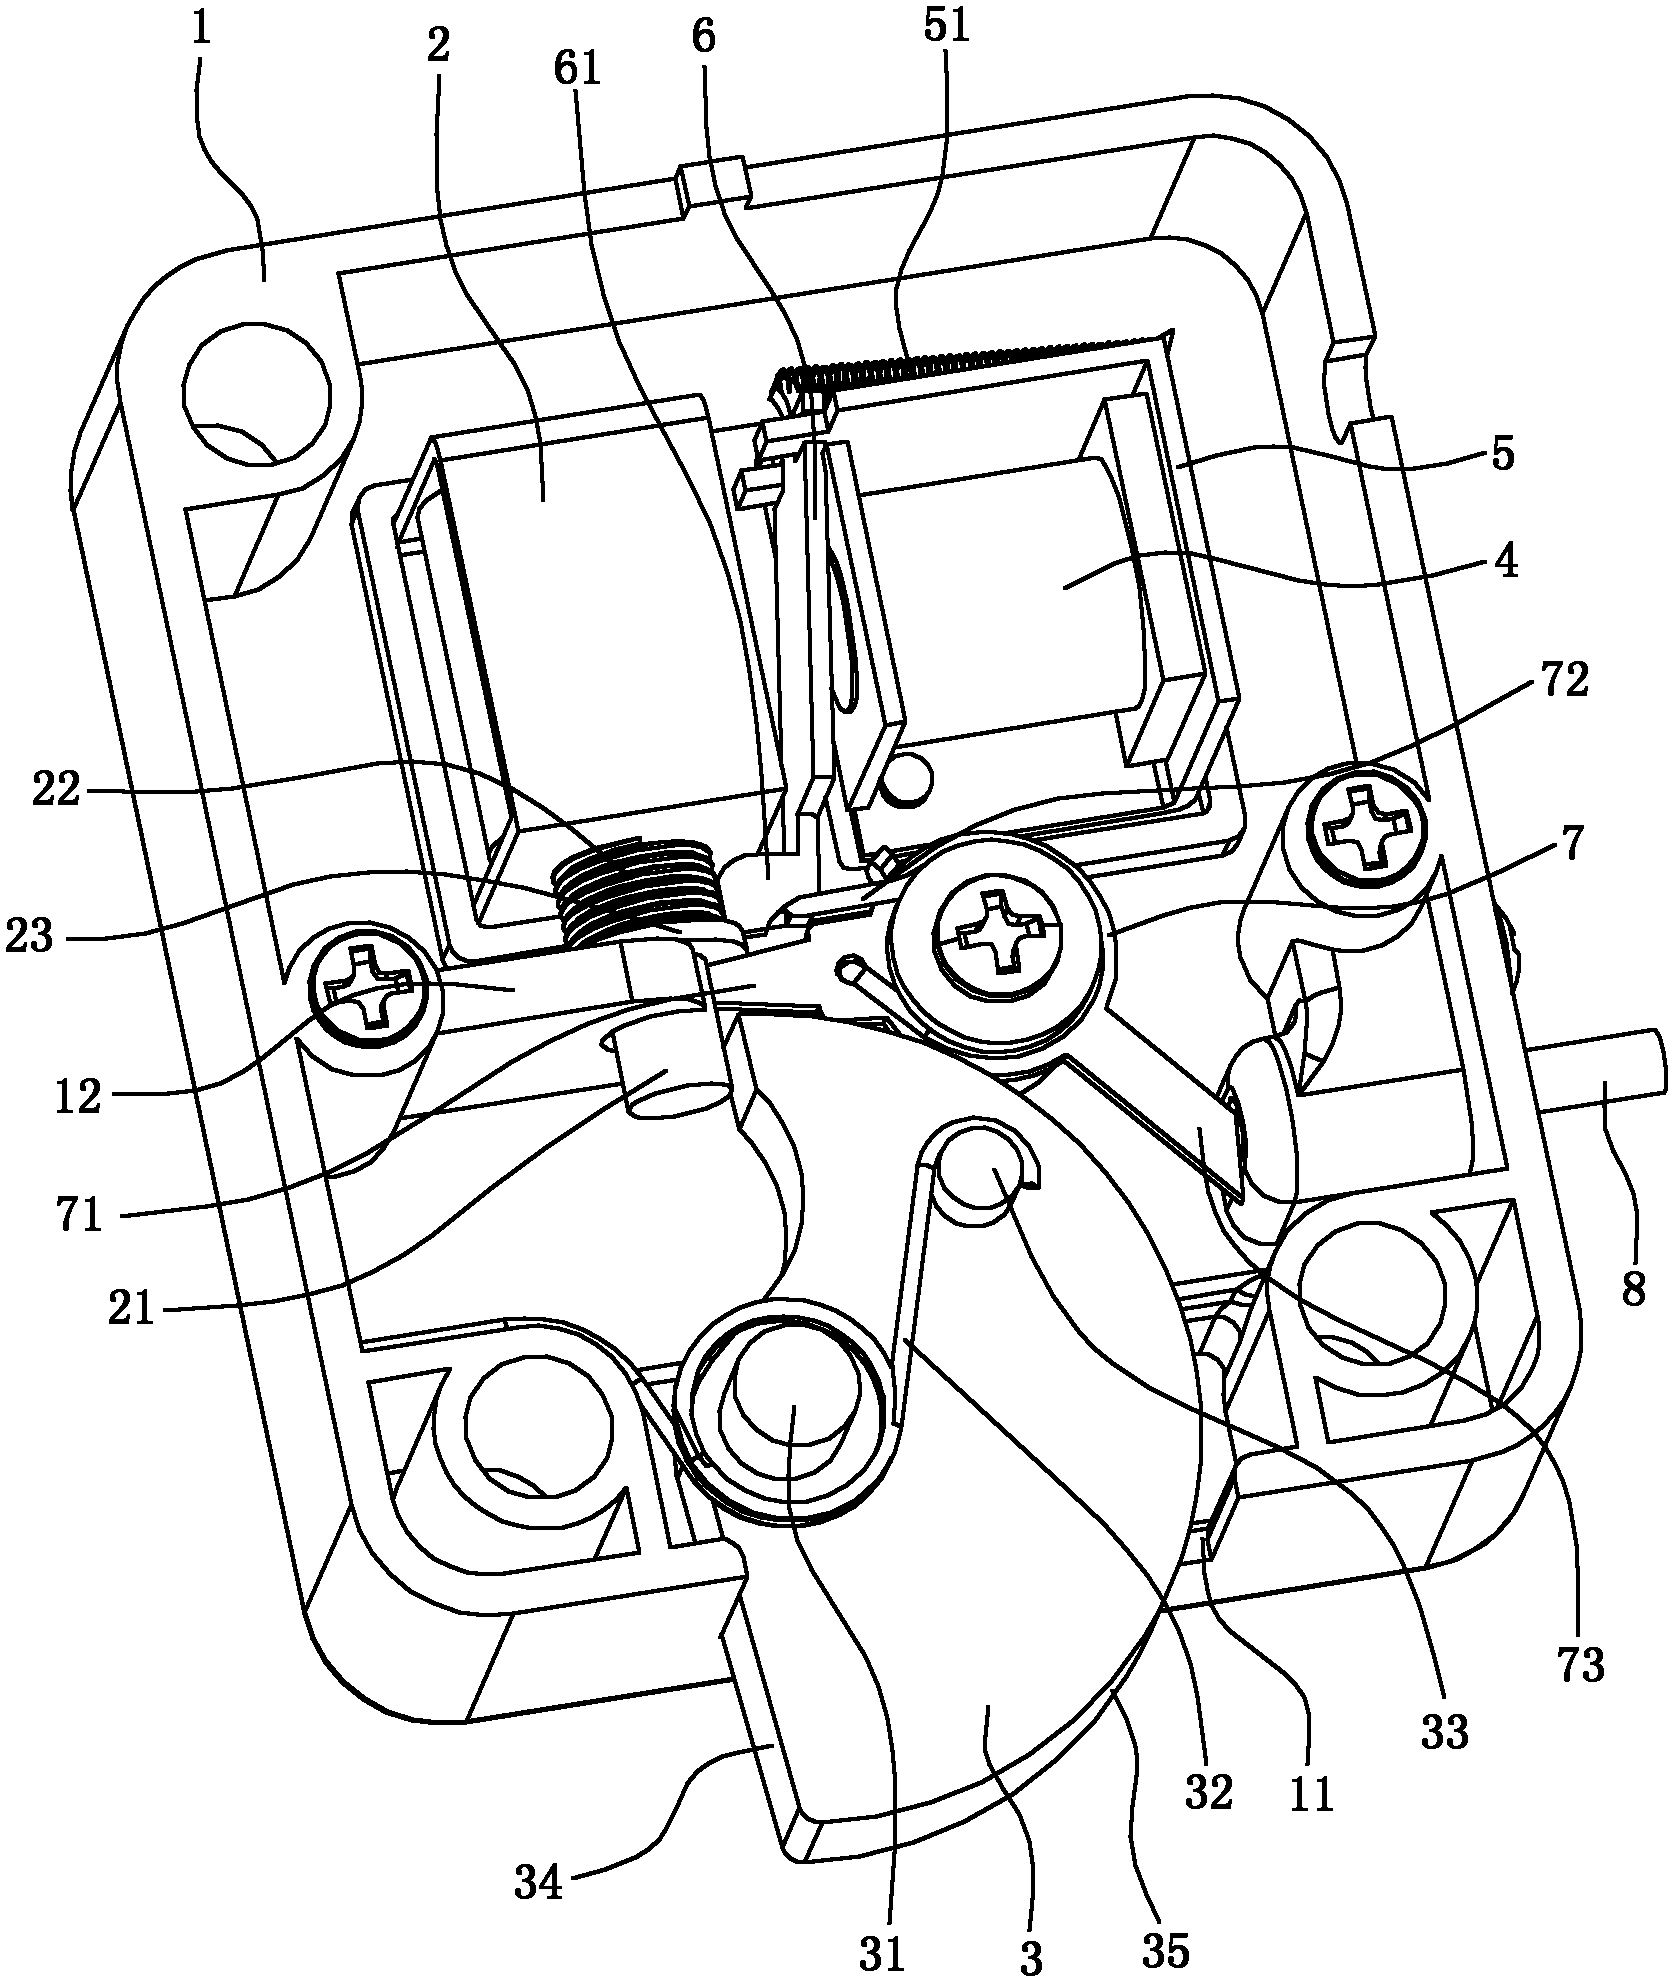 Mechanical and electronic composite lock